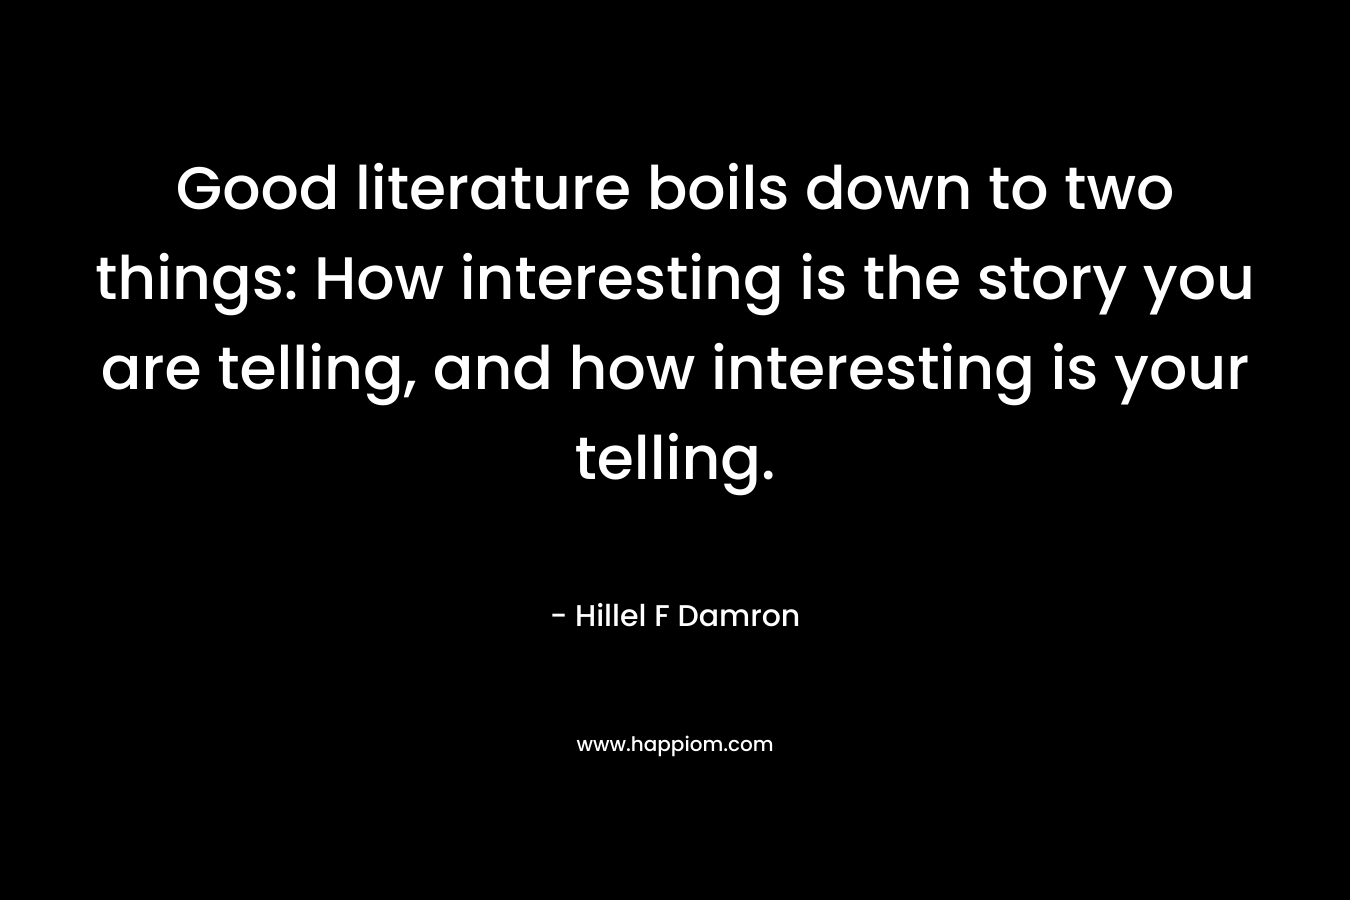 Good literature boils down to two things: How interesting is the story you are telling, and how interesting is your telling.